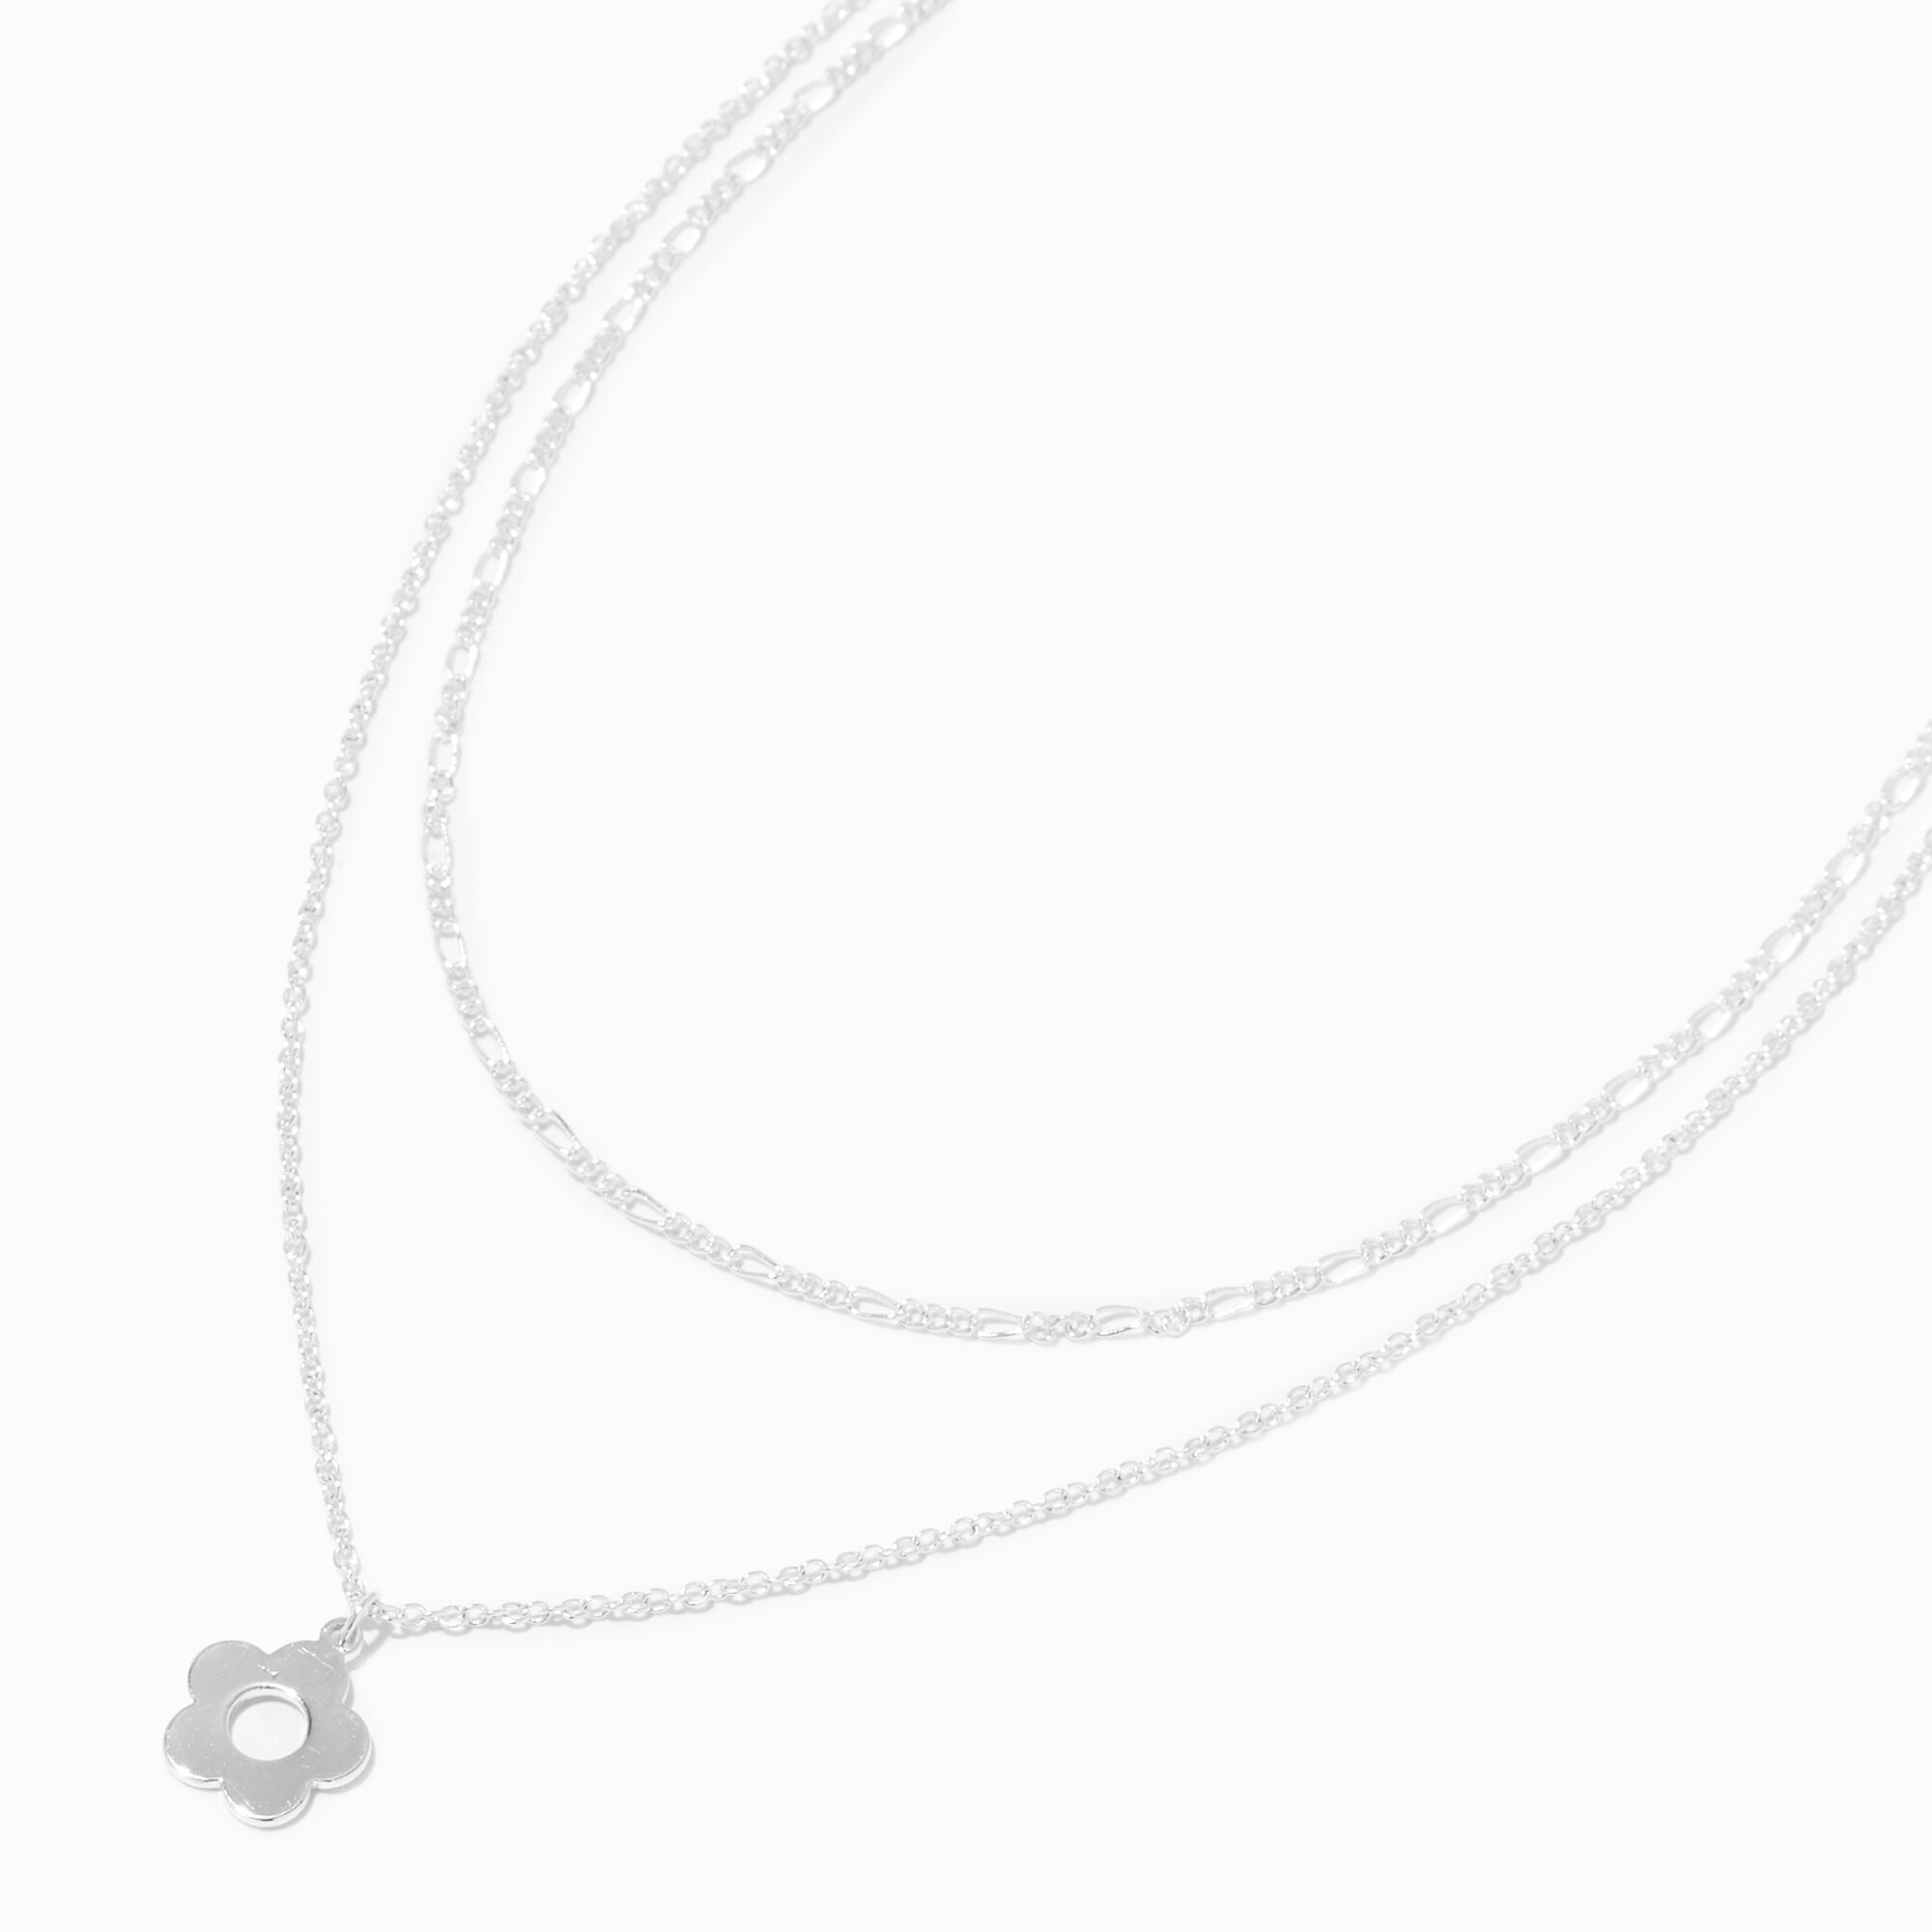 View Claires Tone Metal Daisy Pendant MultiStrand Necklace Silver information